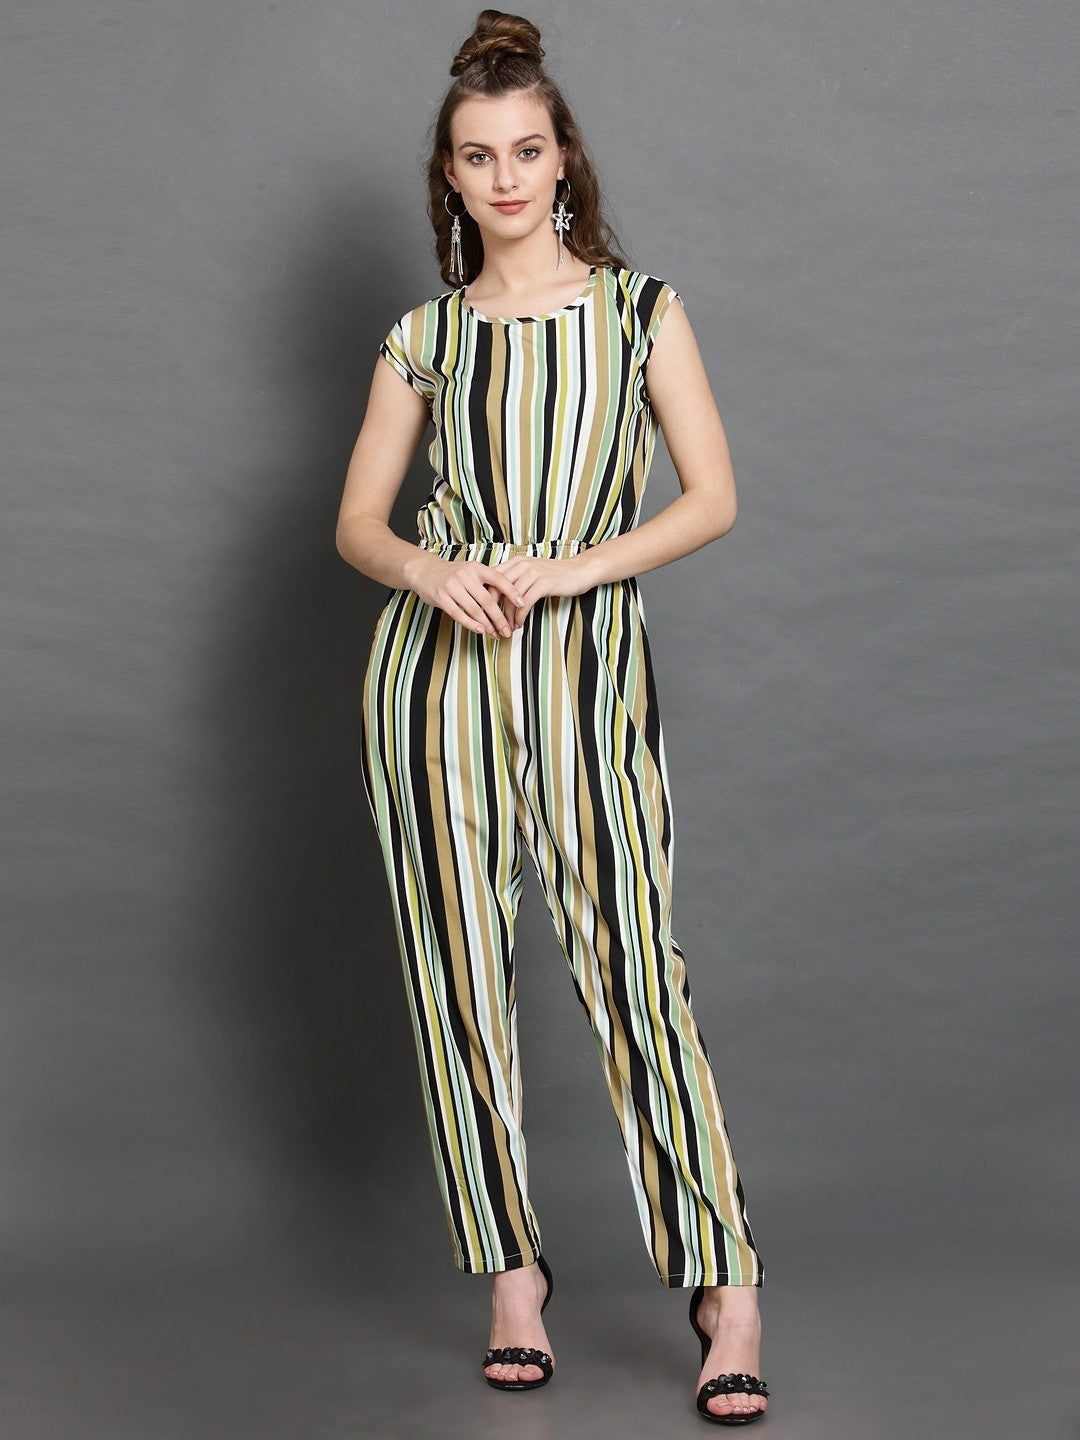 Classic Elegant Colorful Striped Crepe Jumpsuits For Women & Girls😍👌